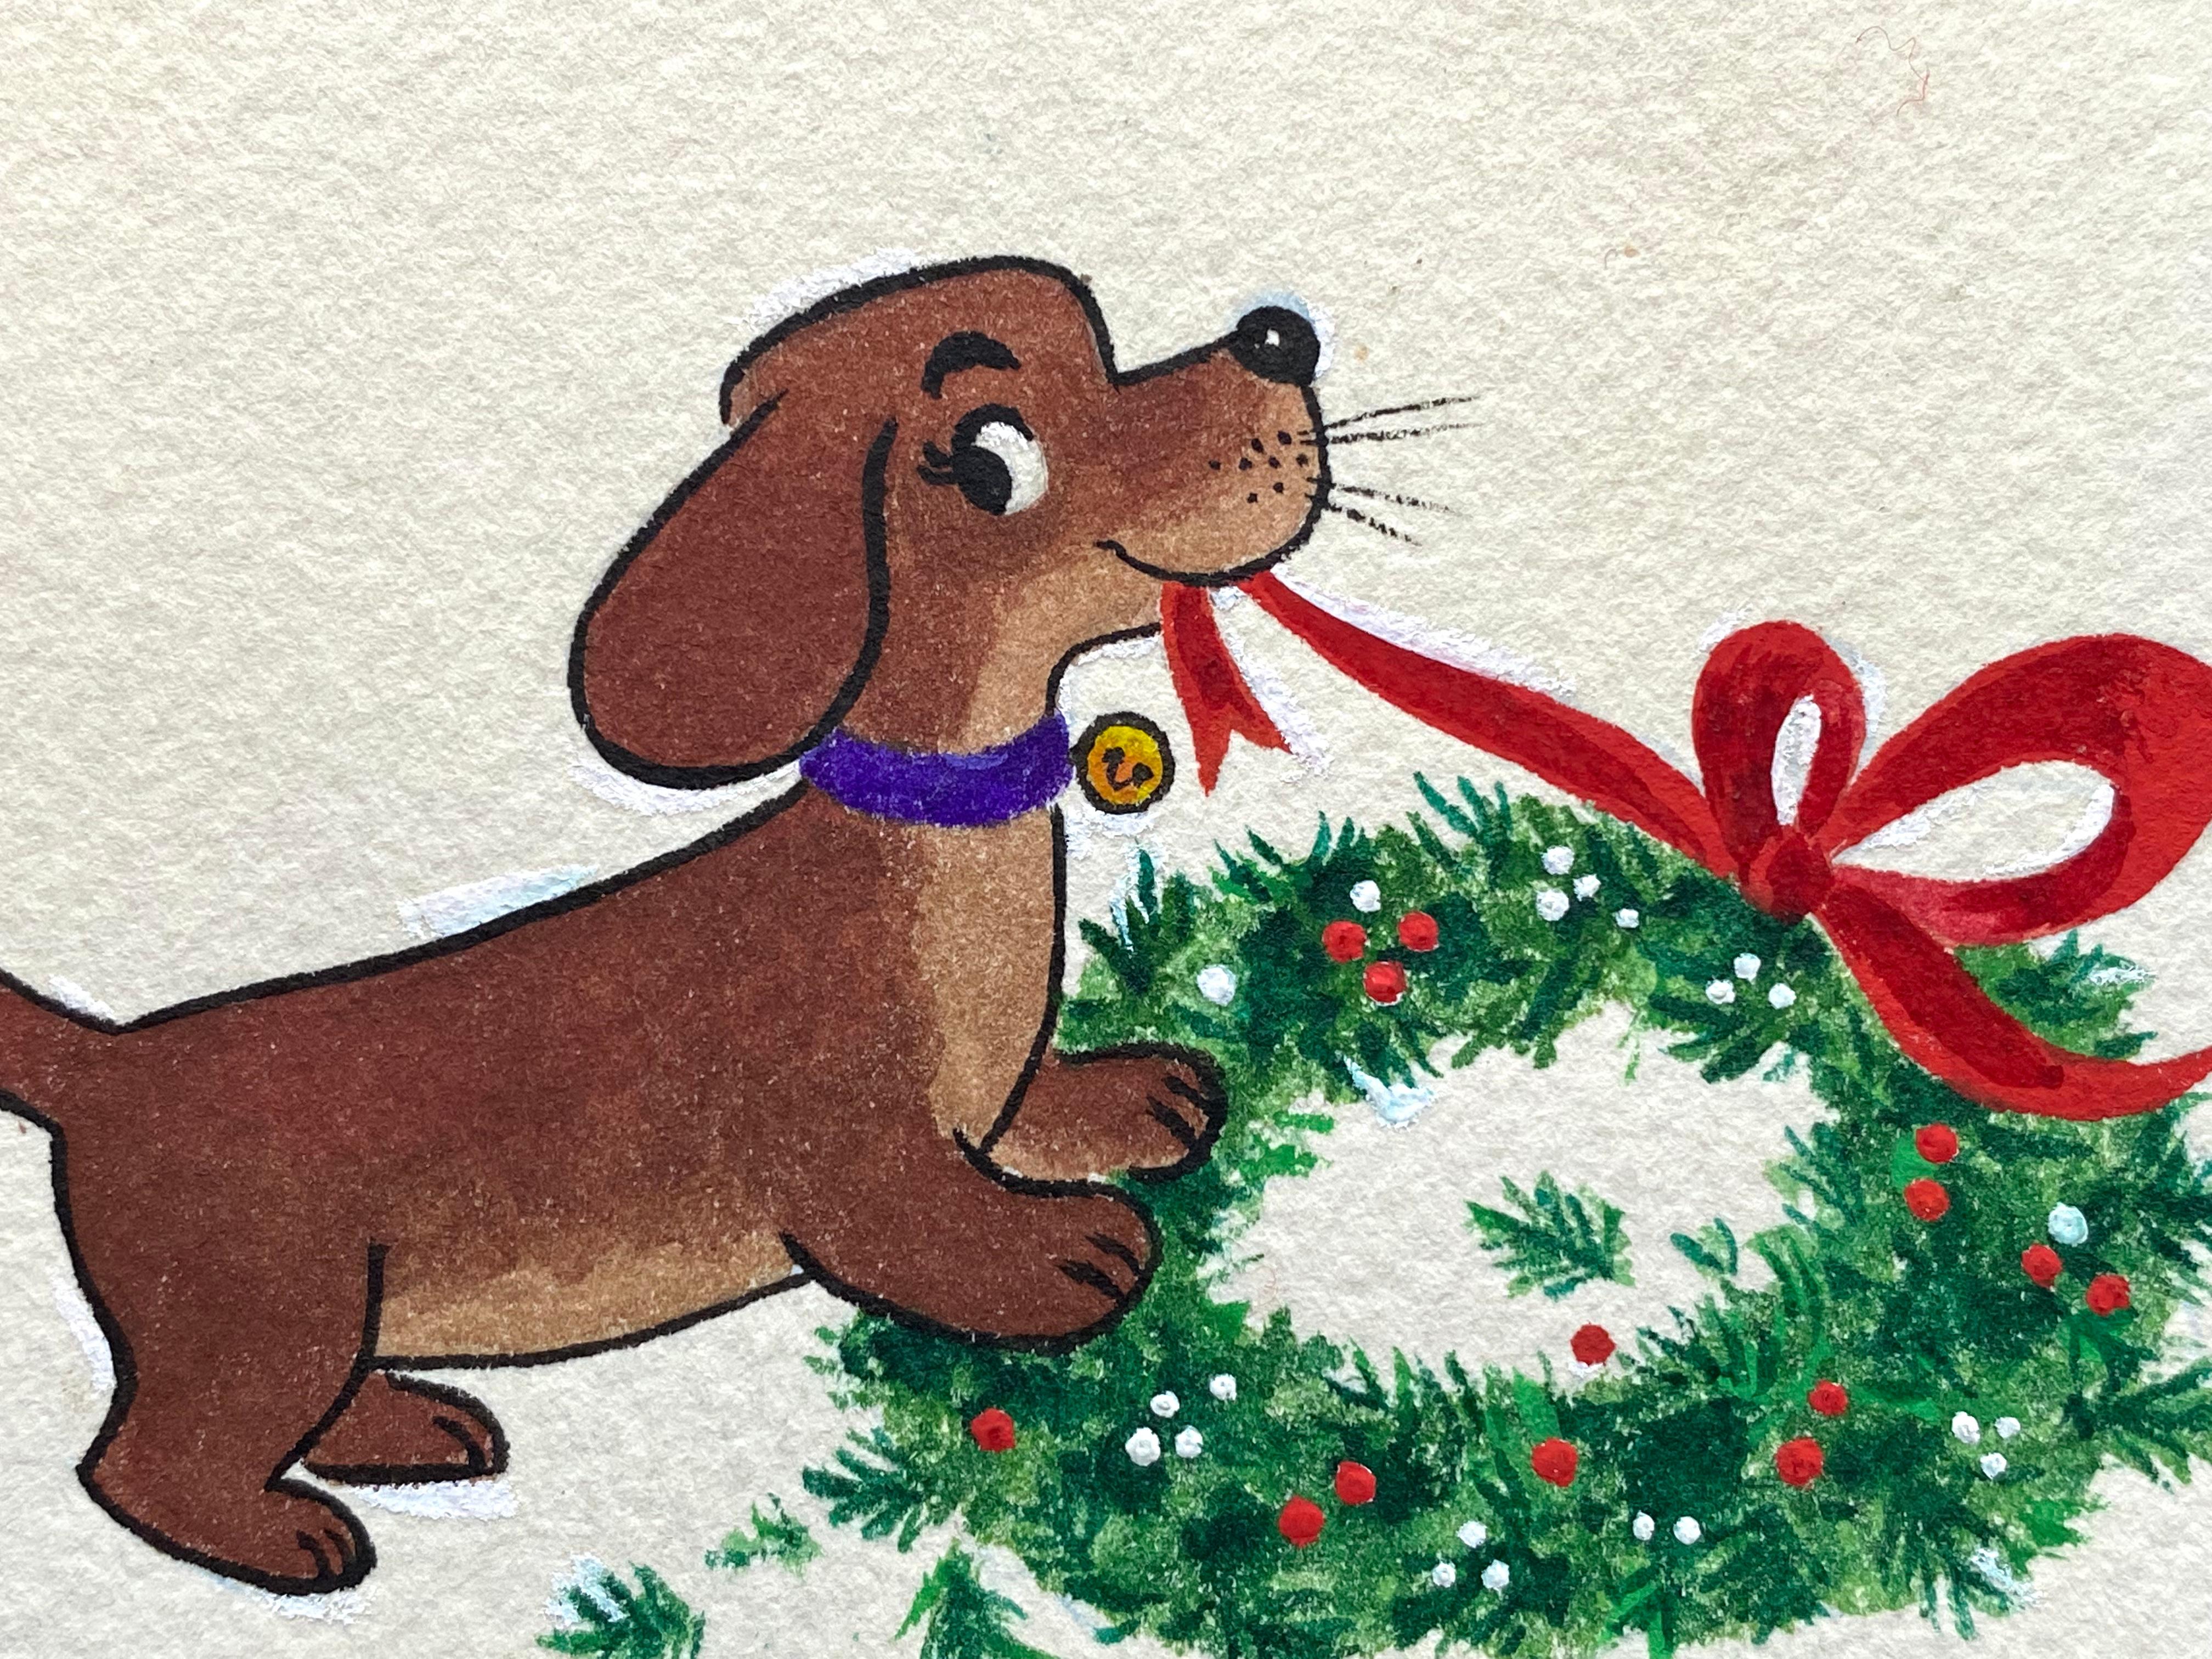 “Puppy with Christmas Wreath” - Art by Unknown